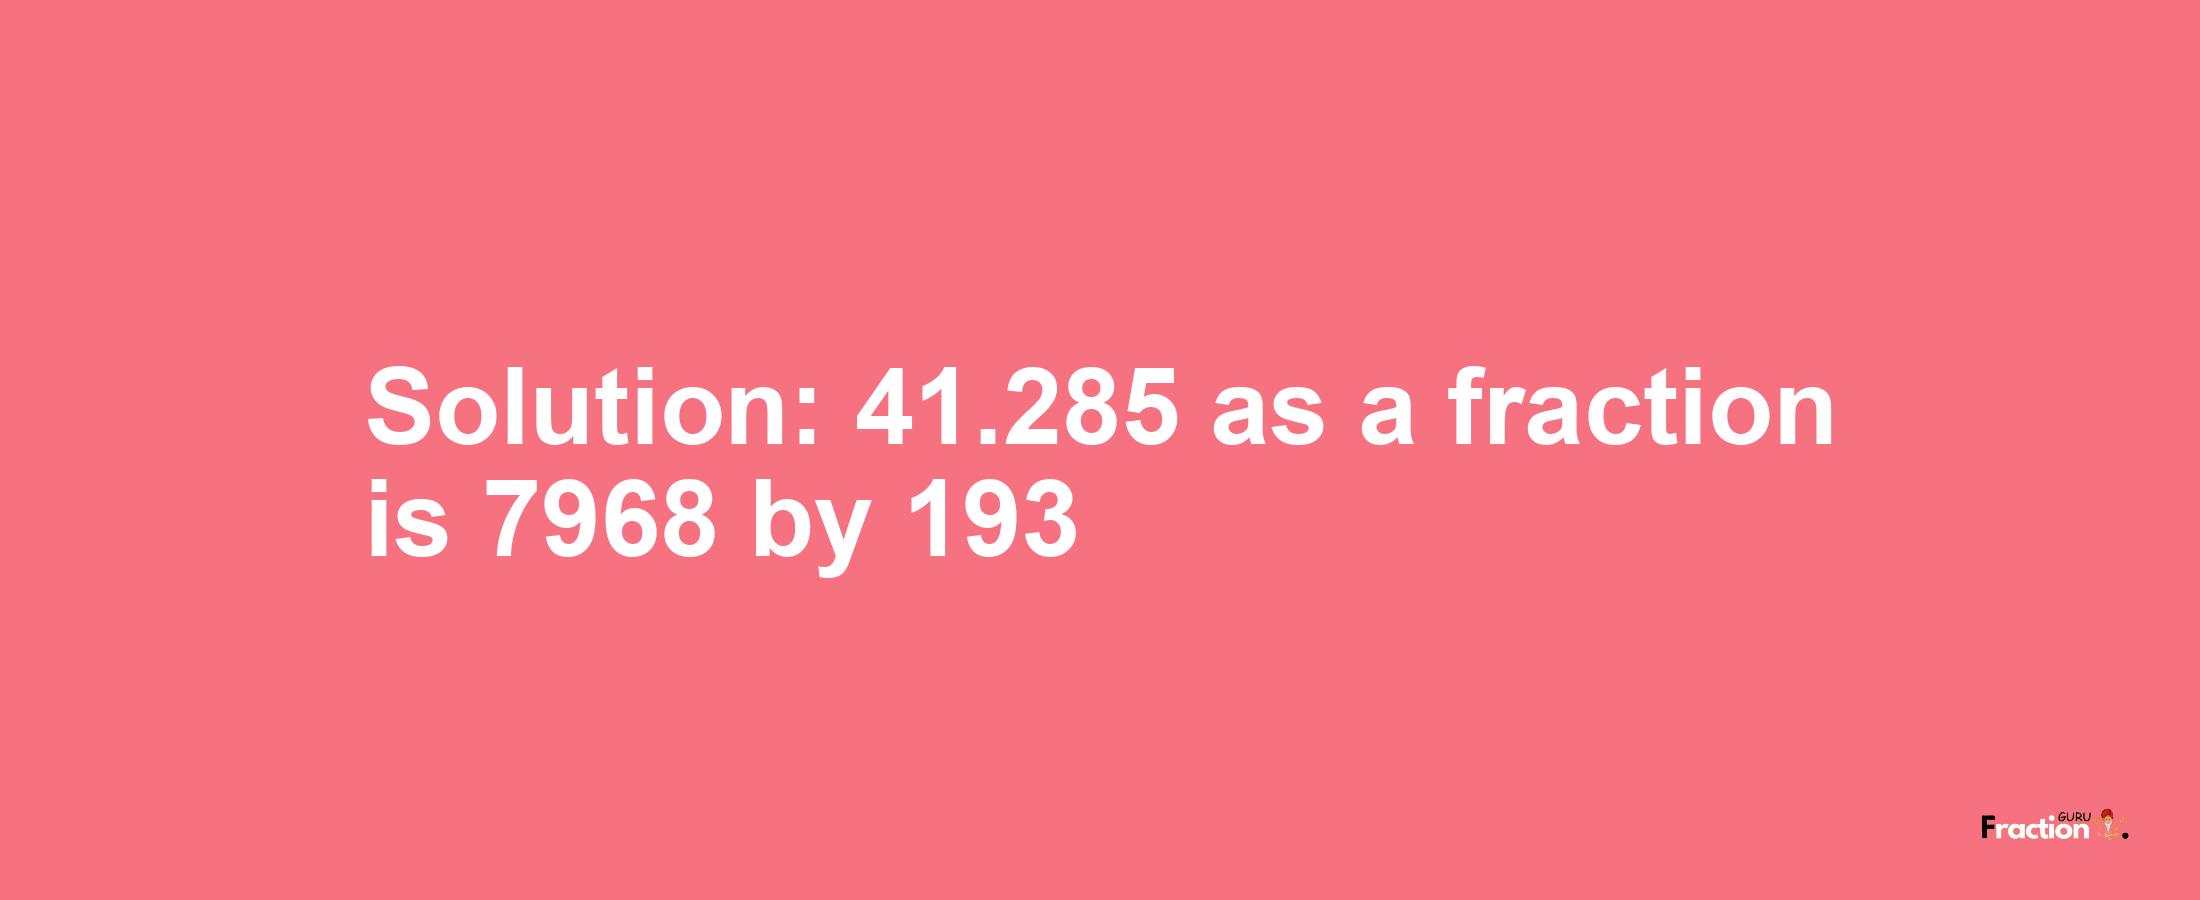 Solution:41.285 as a fraction is 7968/193